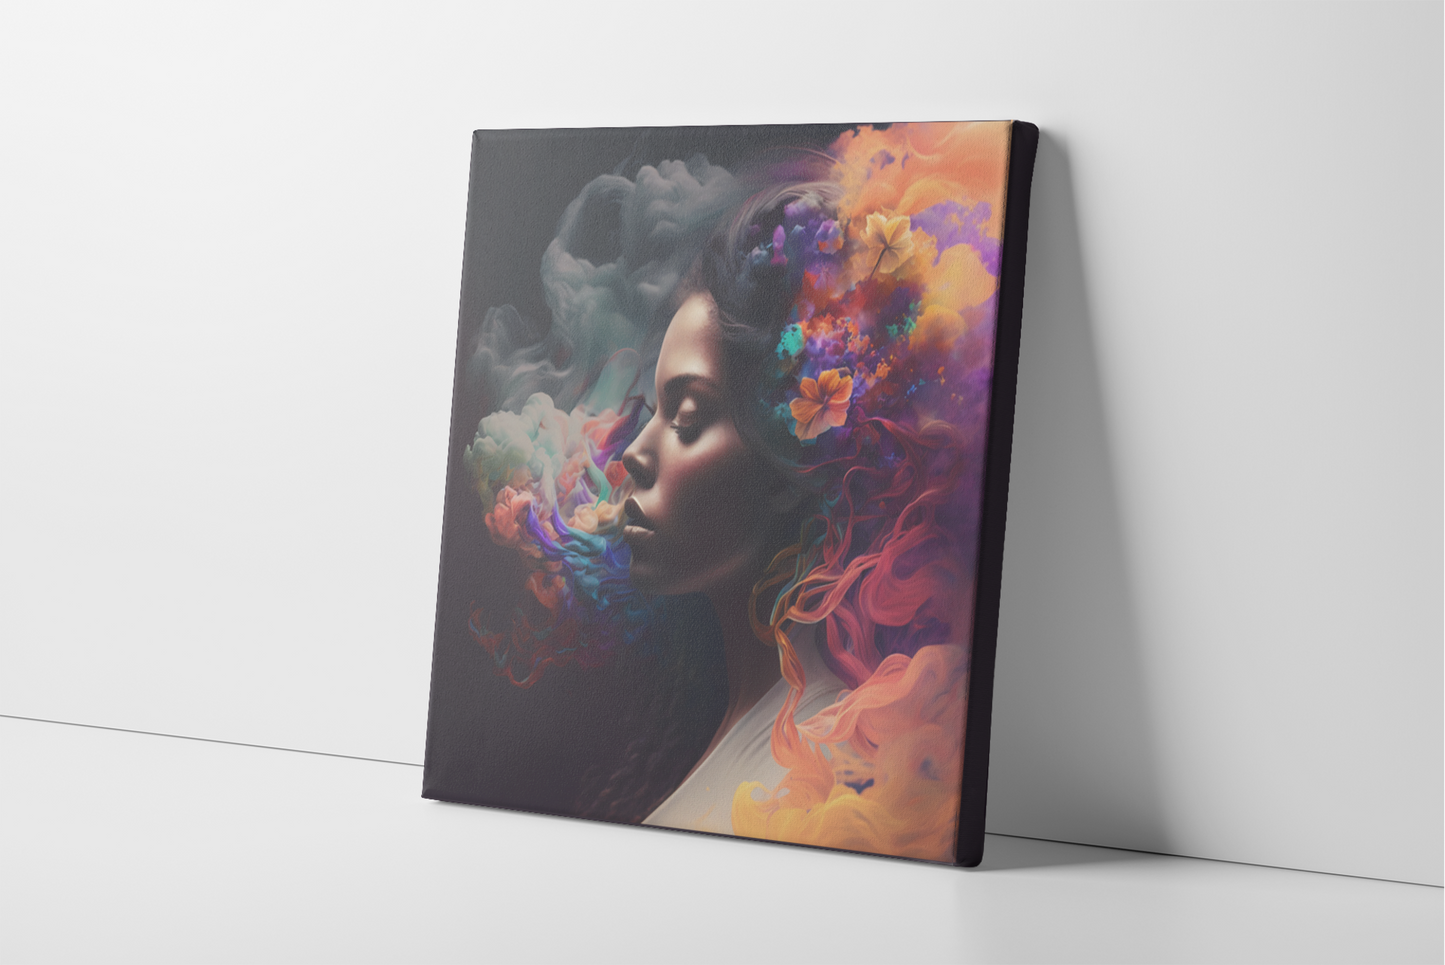 Beauty of the Feminine Form Canvas Wall Art, Woman with Flowers in Her Hair with Vibrant, Billowing Hair Canvas Print